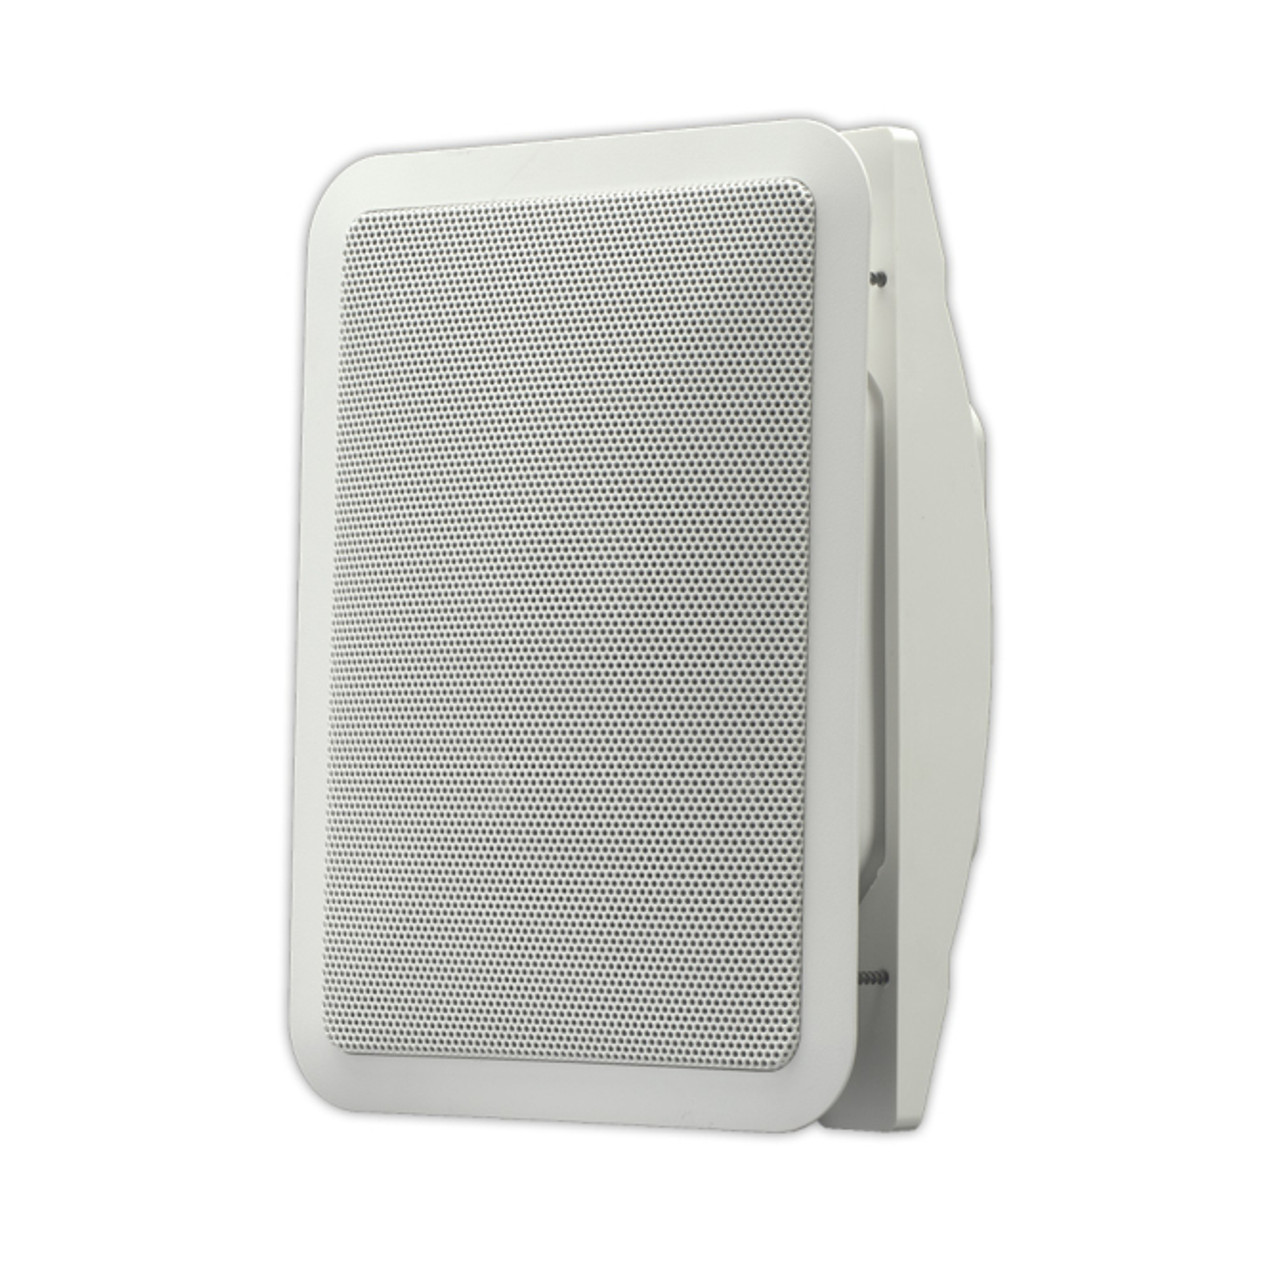 SoundTube IW500B-WH 5.25" In-Wall Speaker System in White with a BroadBeam® Tweeter (IW500B-WH)